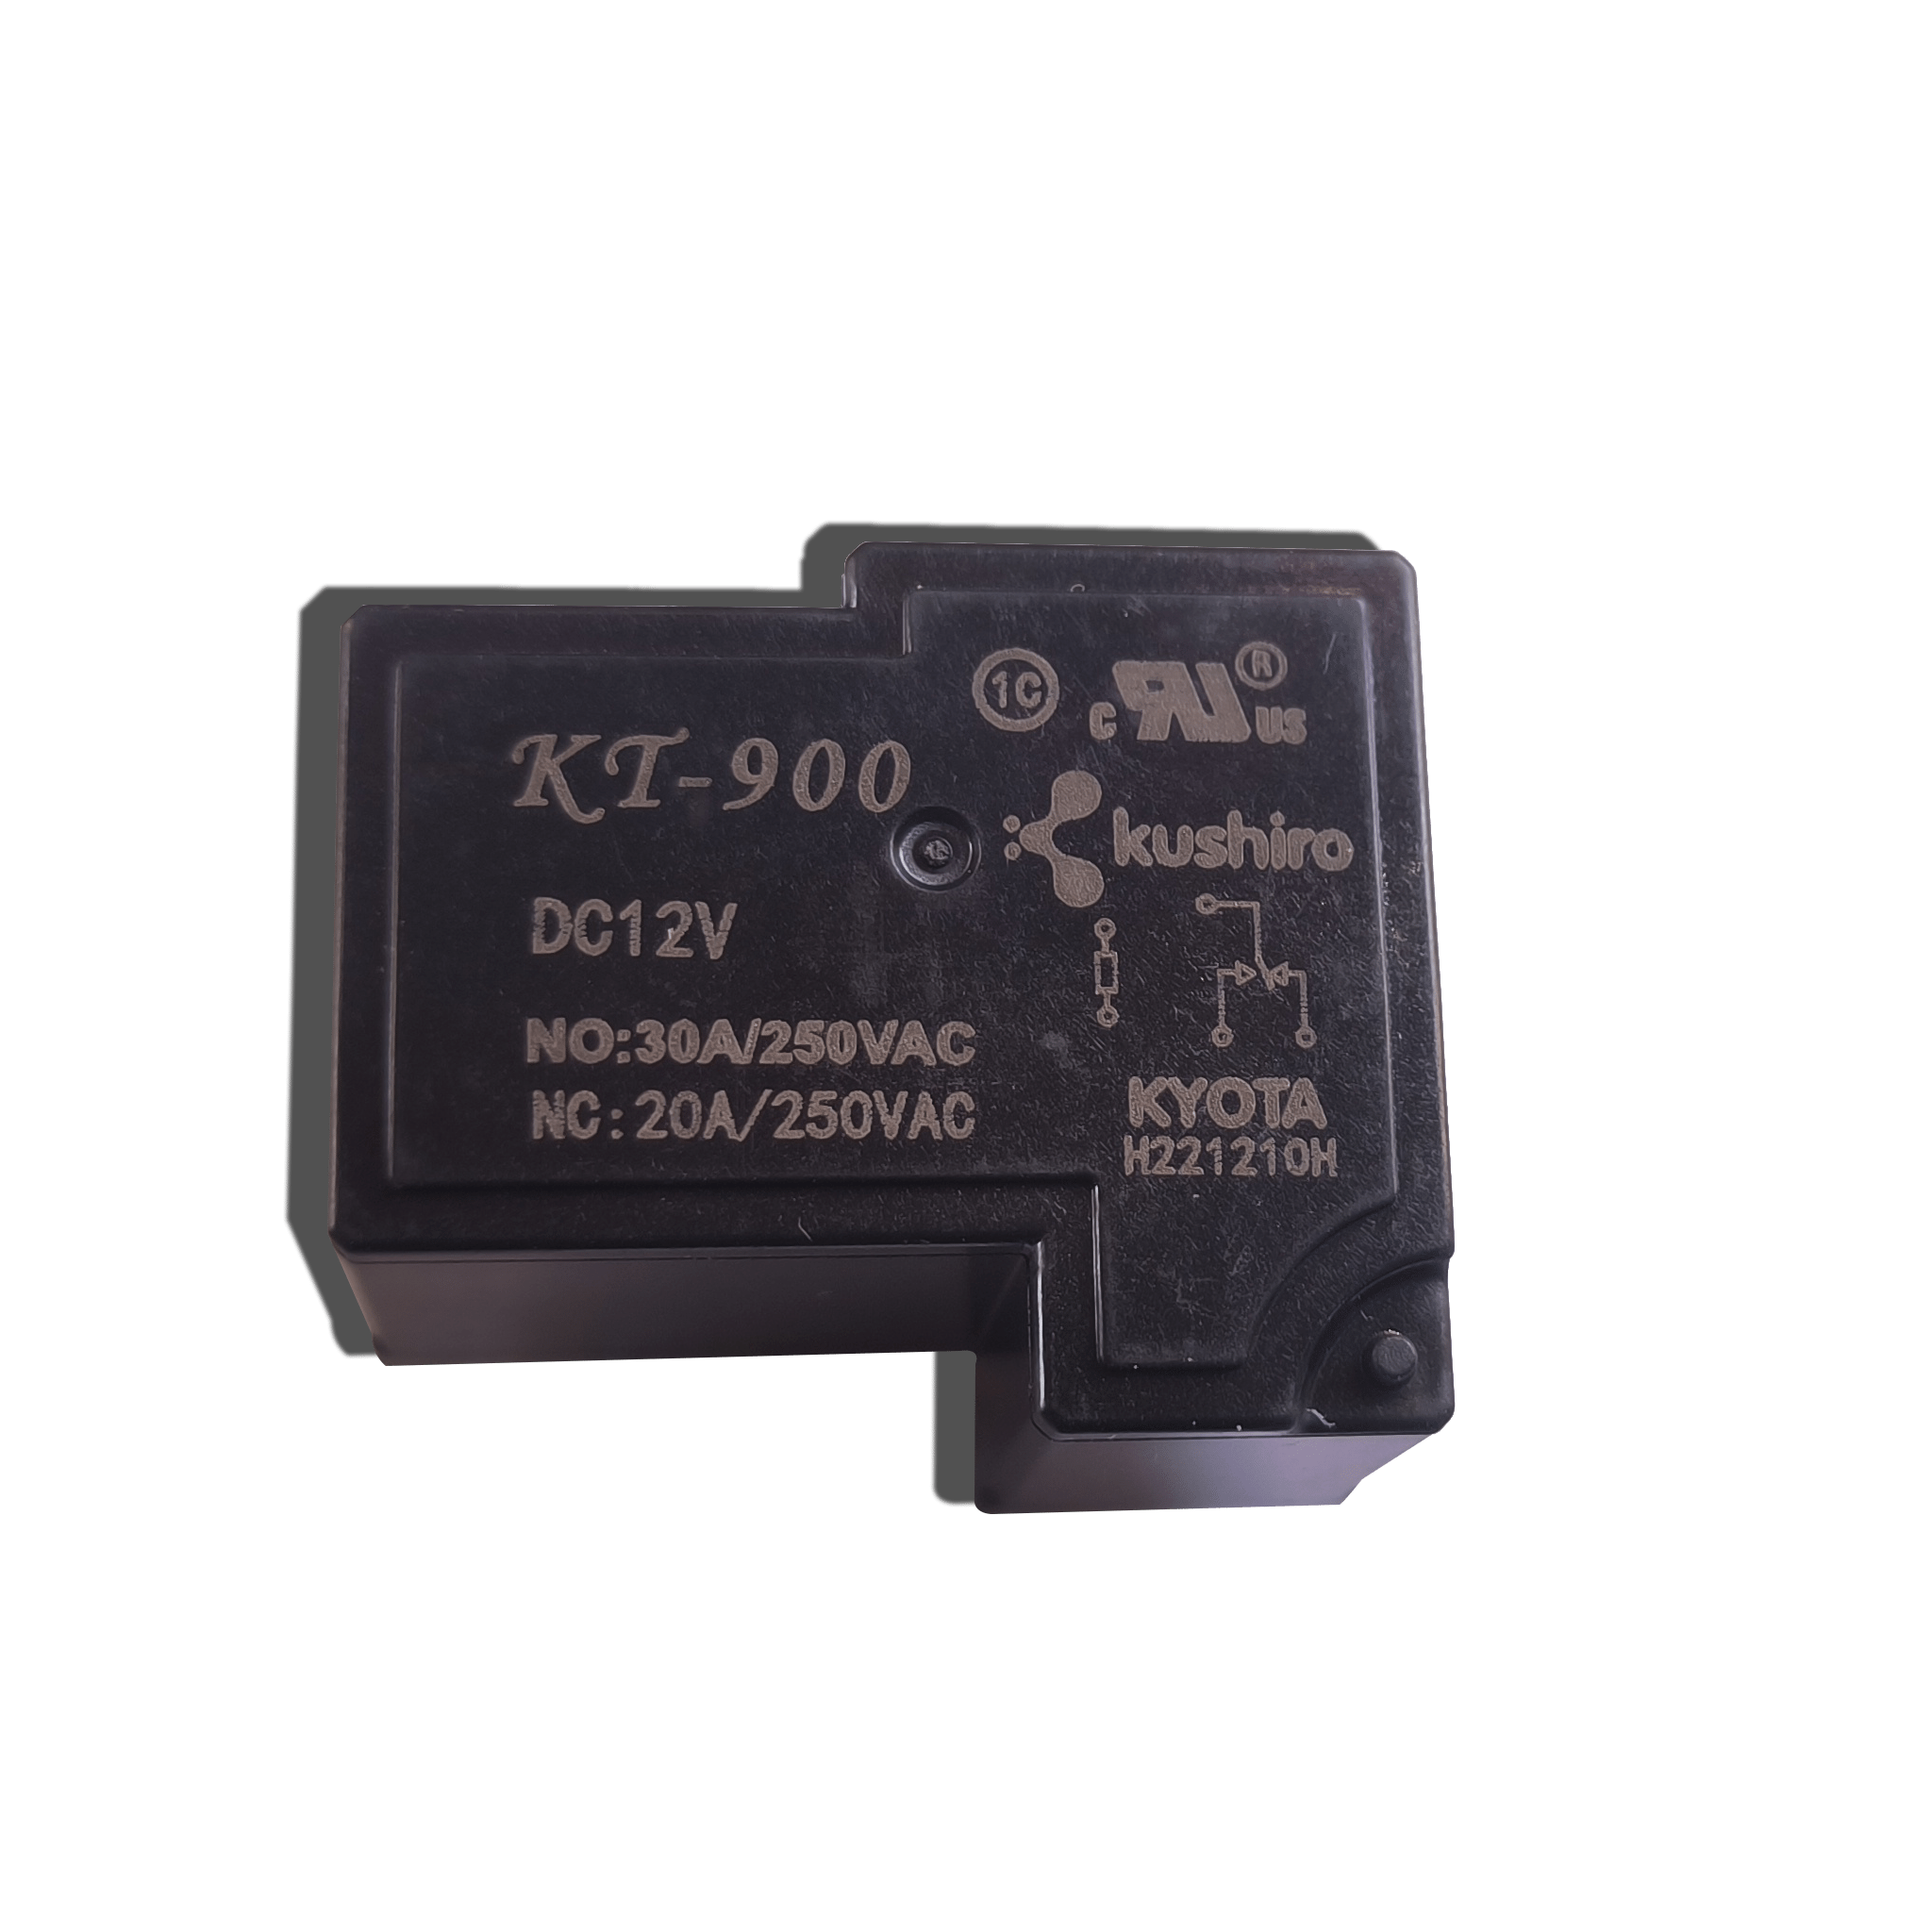 KT900 relays are available in Punoscho store